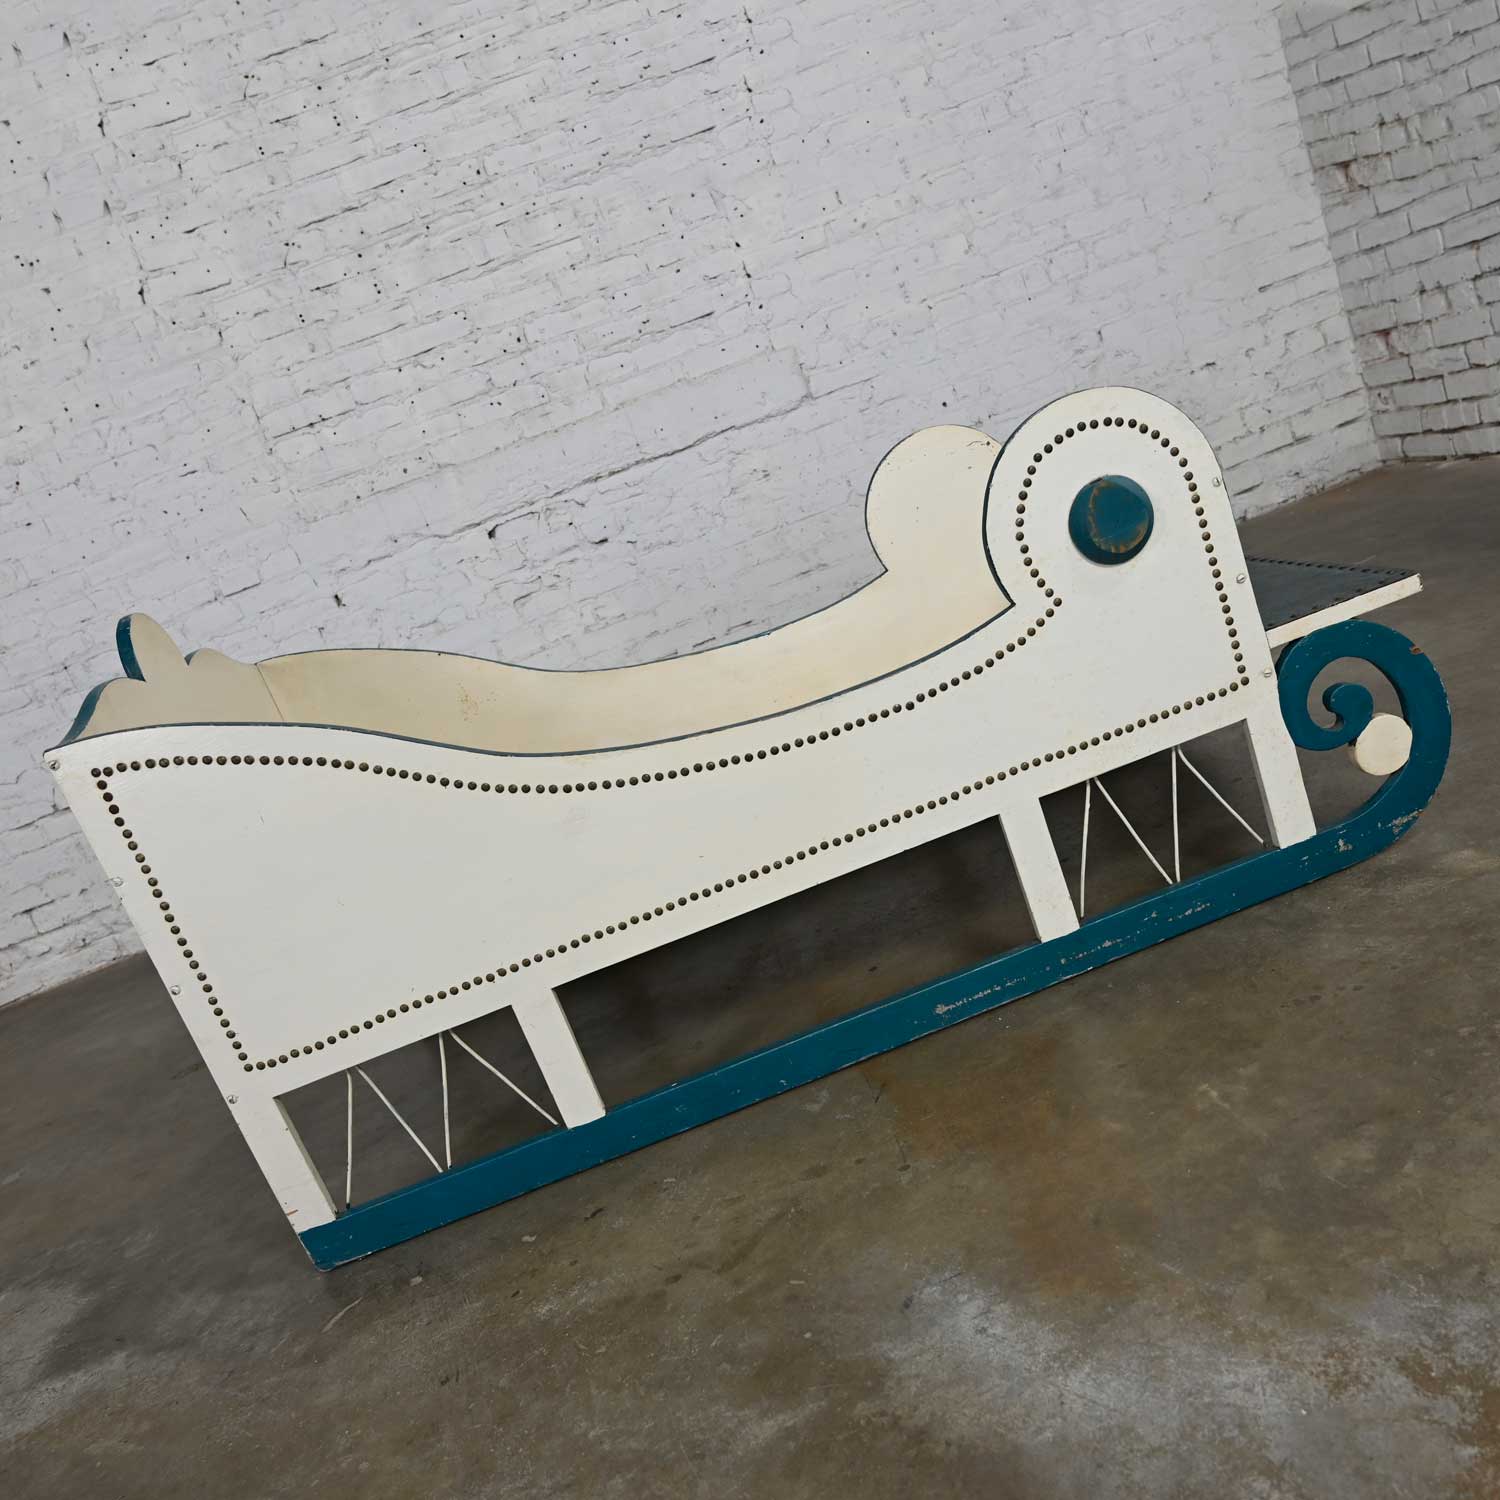 Vintage Toddler or Dog Sleigh Style Bed White with Blue Trim & Nail Head Design